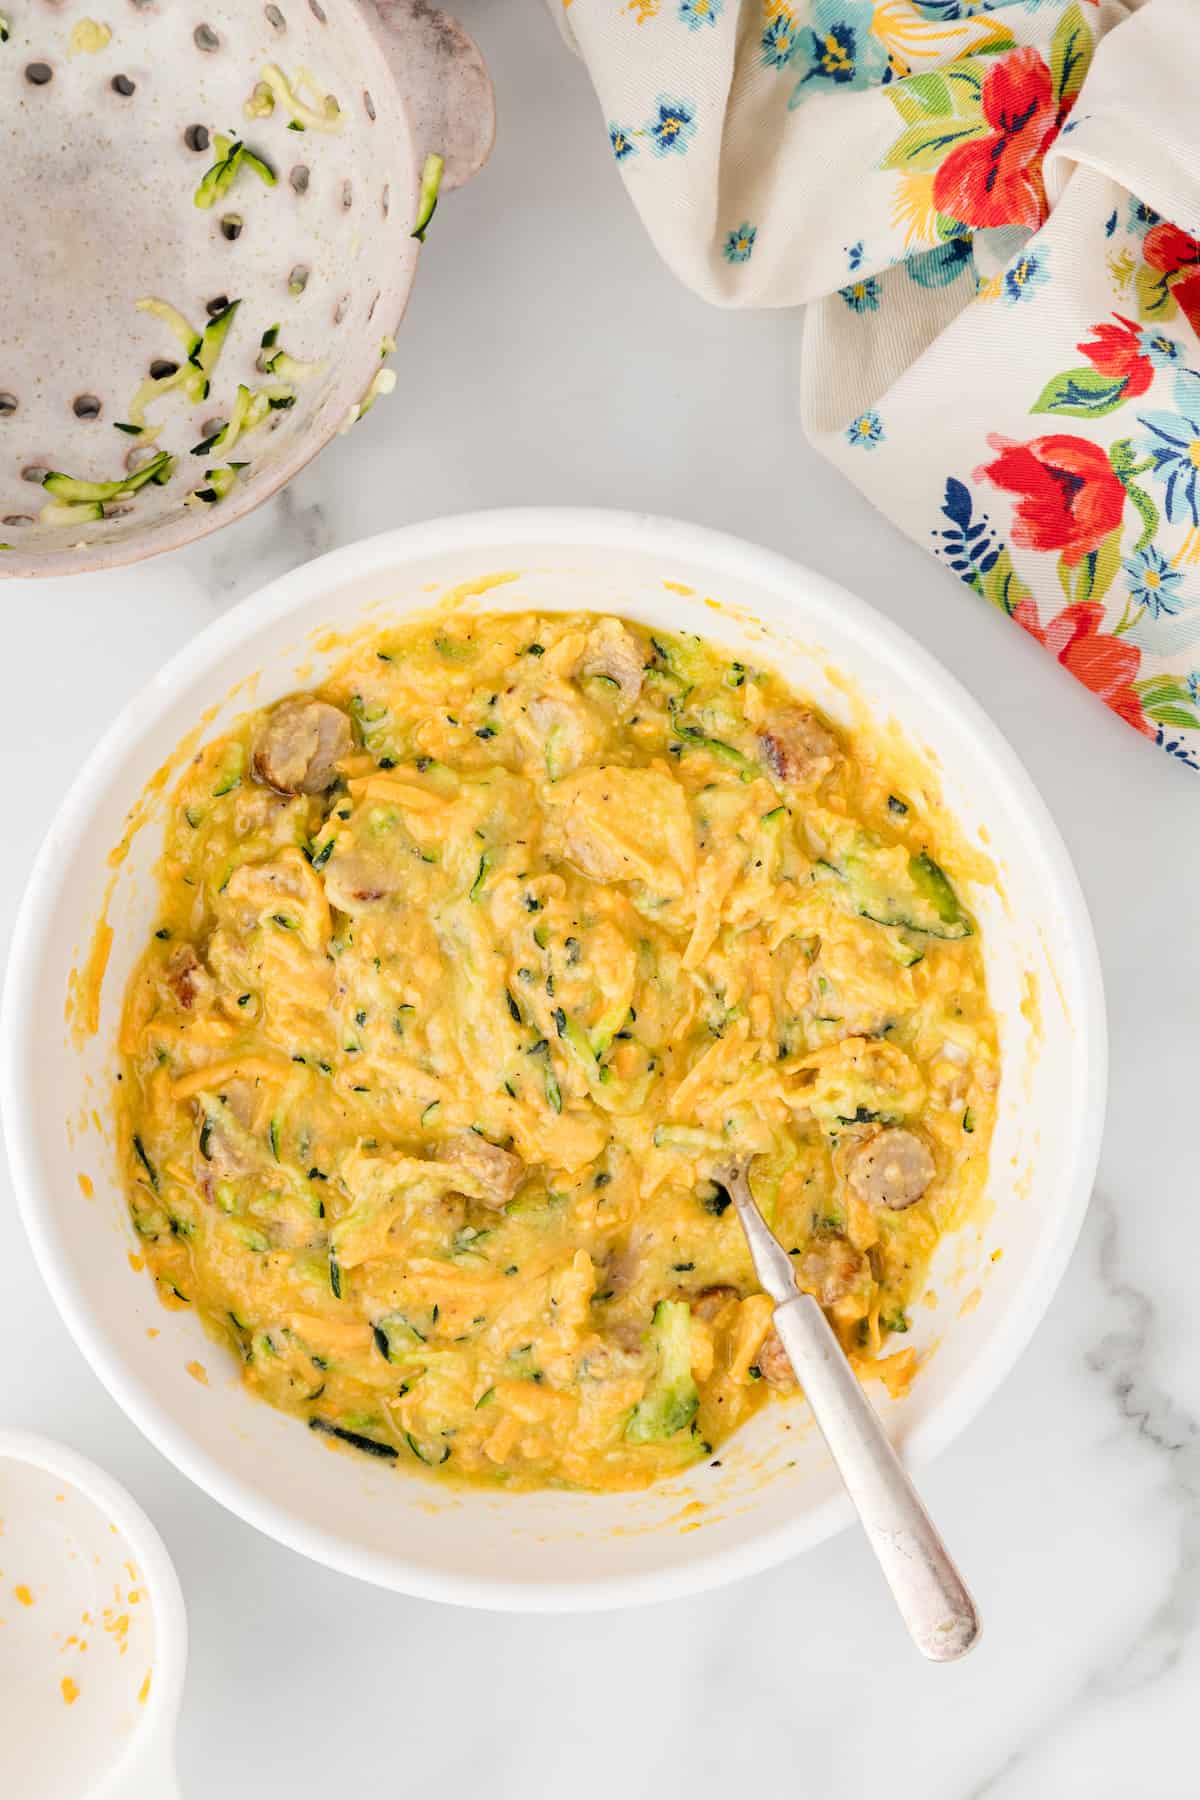 the egg, zucchini, and sausage mixture